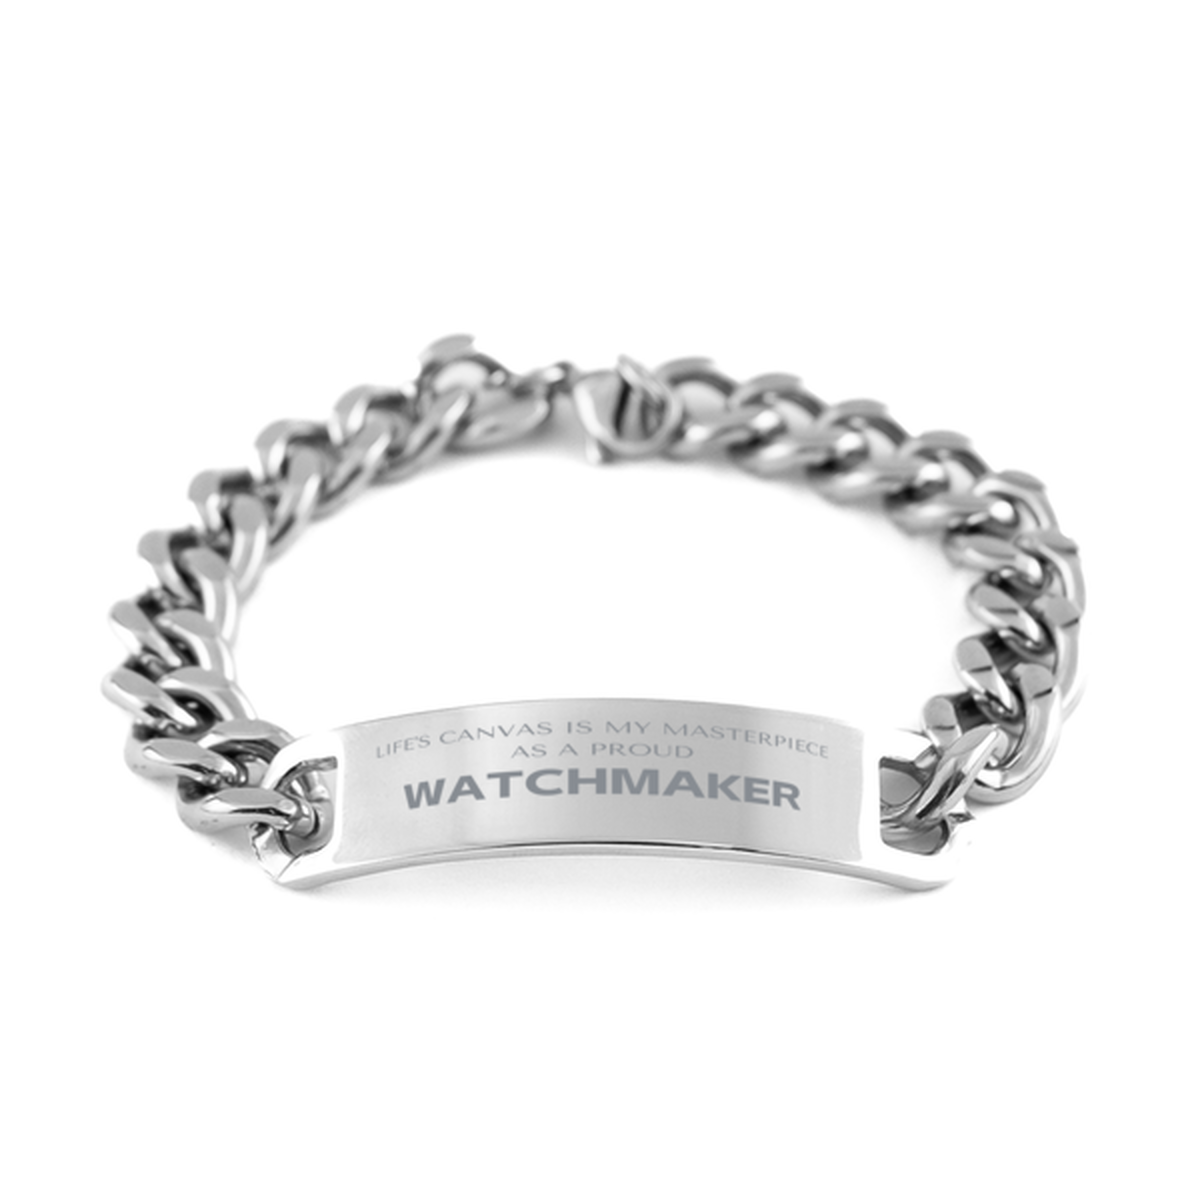 Proud Watchmaker Gifts, Life's canvas is my masterpiece, Epic Birthday Christmas Unique Cuban Chain Stainless Steel Bracelet For Watchmaker, Coworkers, Men, Women, Friends